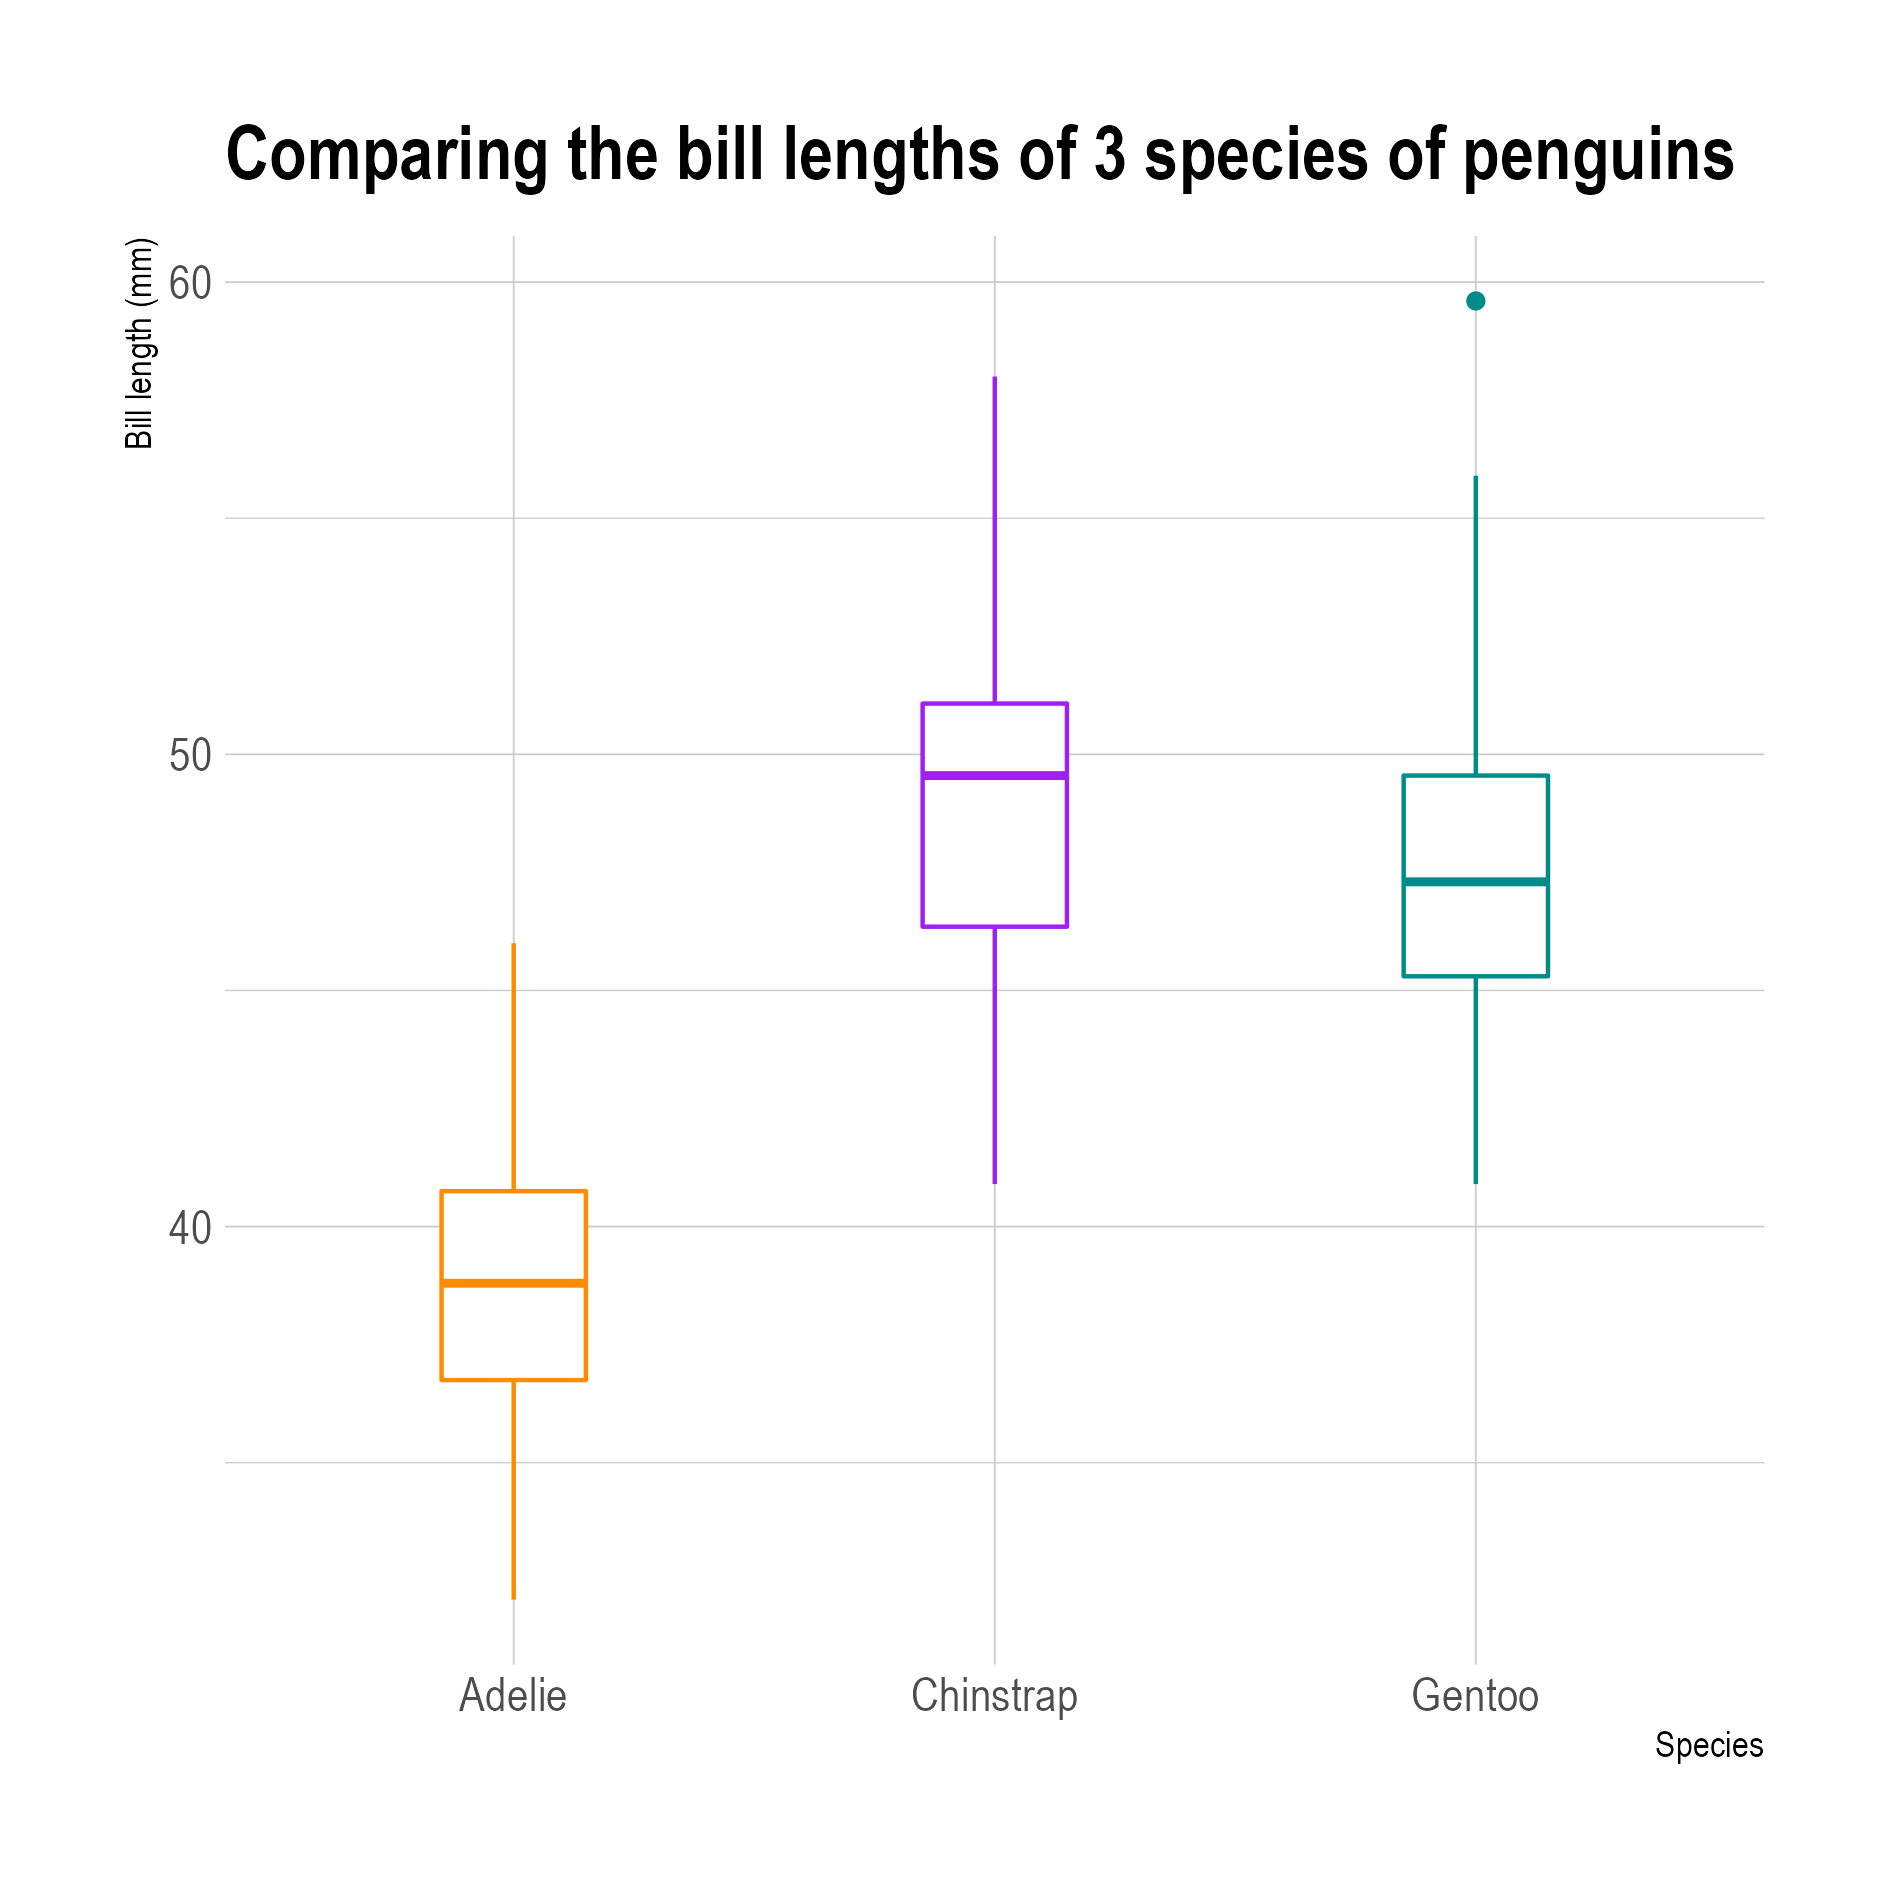 3 box plots comparing the bill lengths of 3 species of pengiuns